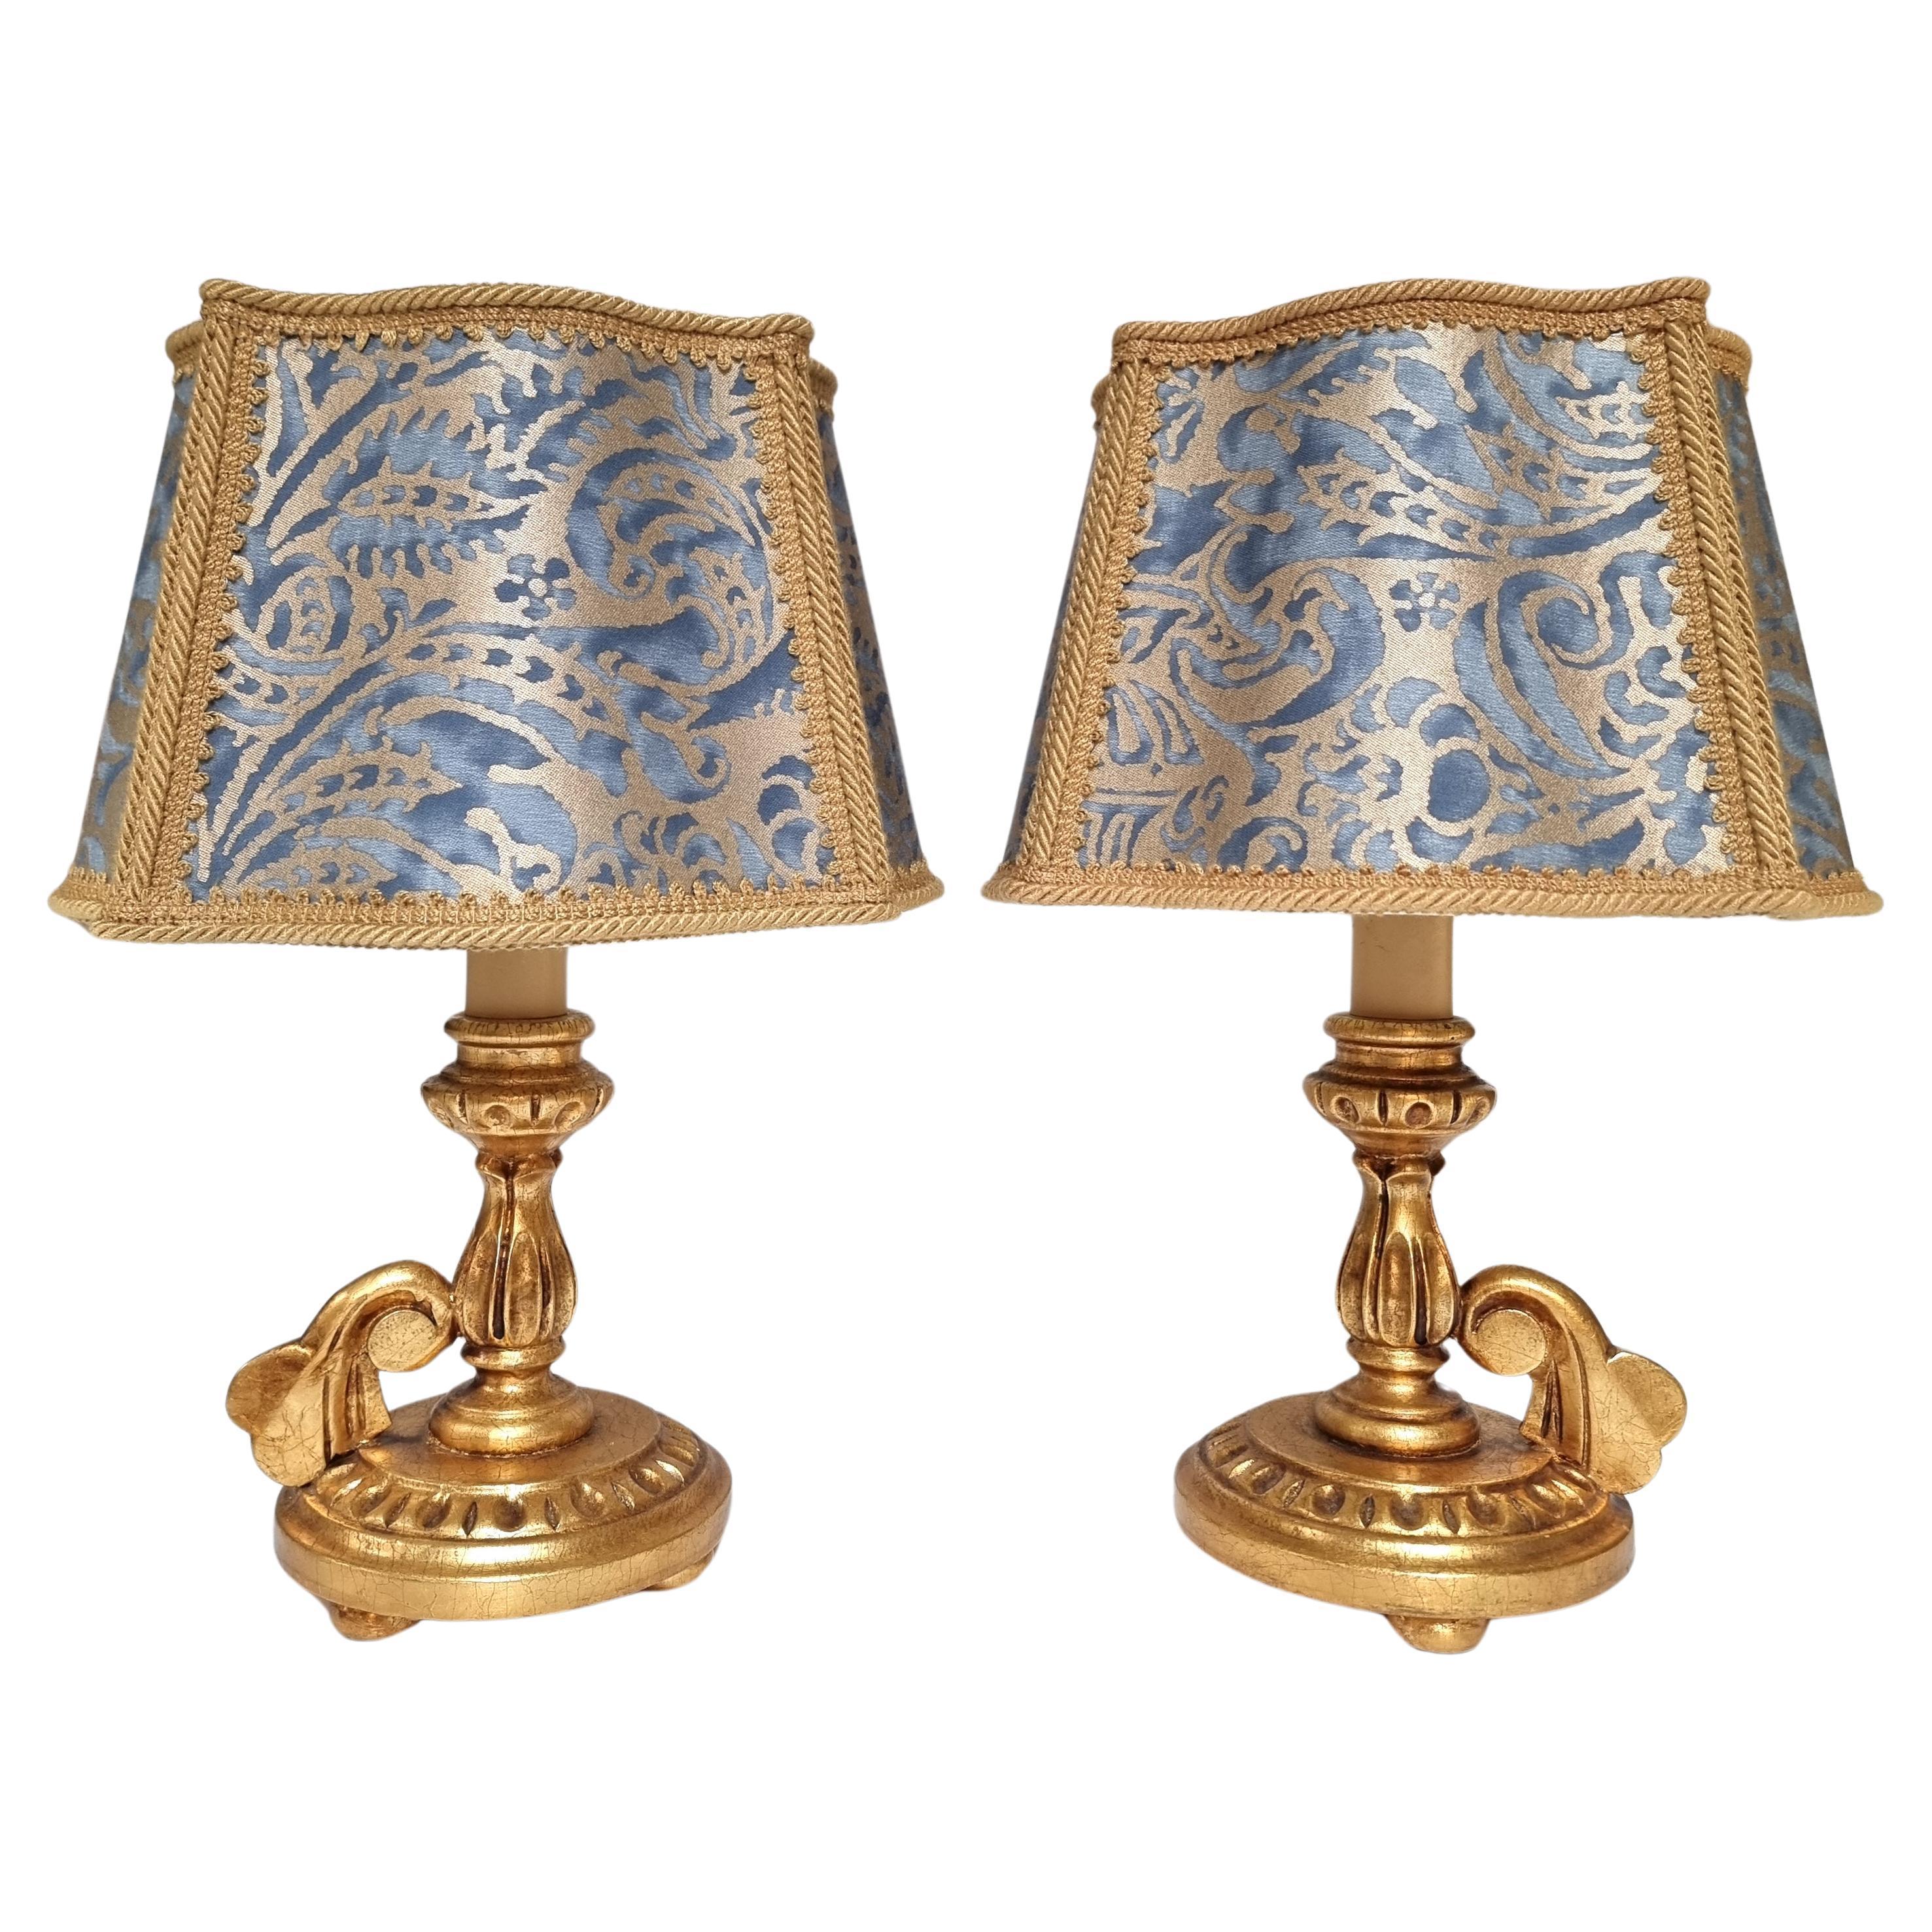 Pair of Italian Gold Leaf Wooden Candlestick Table Lamps with Fortuny Lampshades